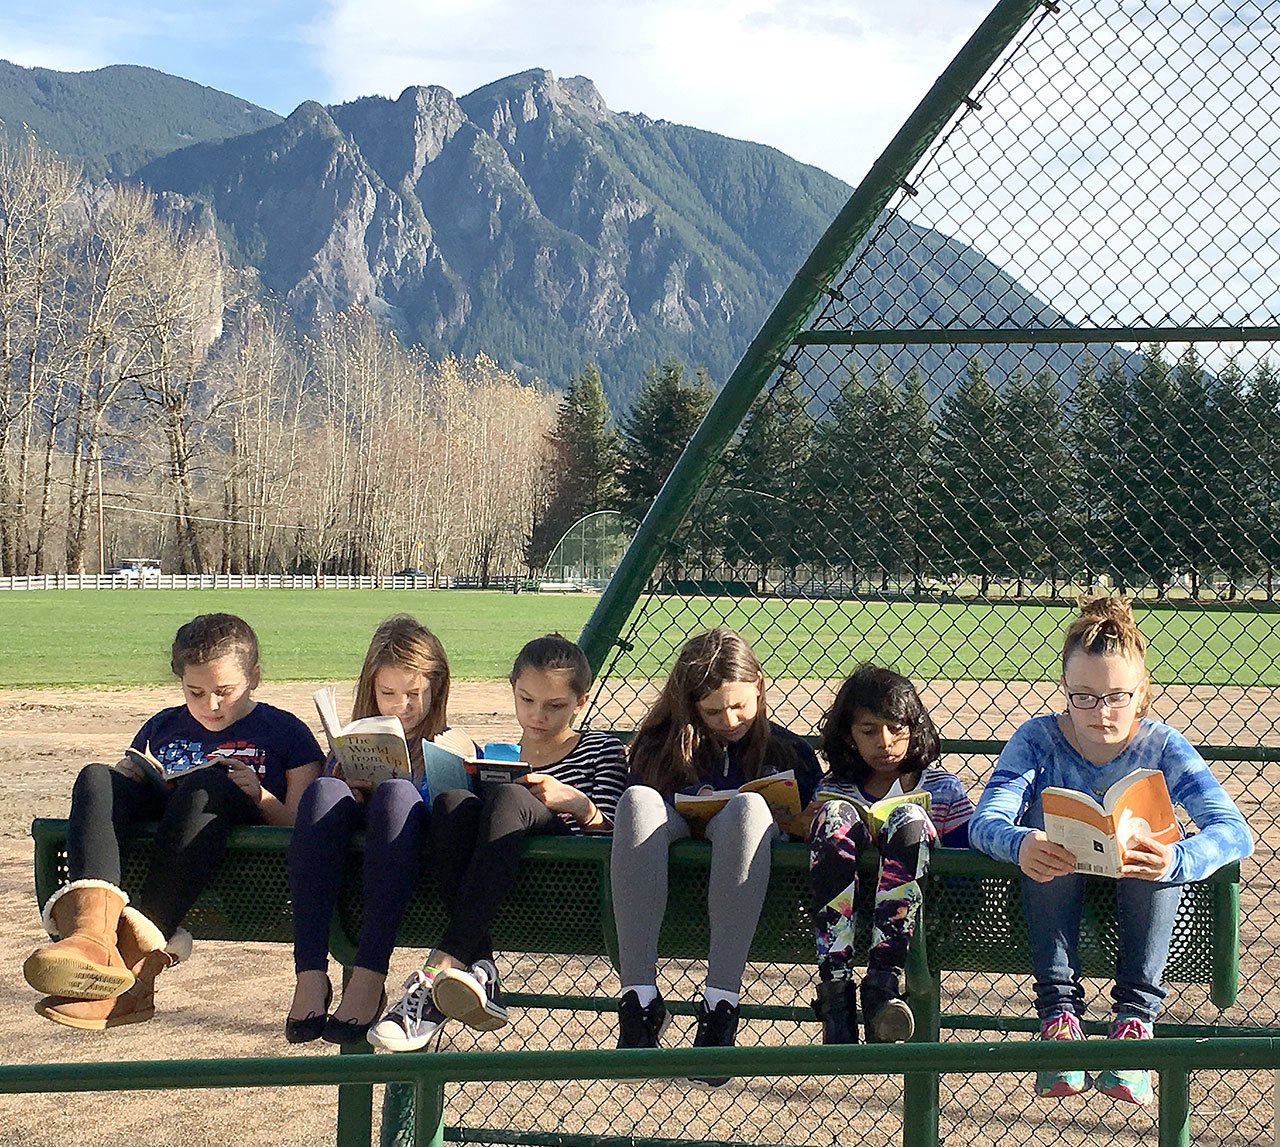 Curled up in the sunshine with their books are, from left, Elizabeth Conlon, Mallory Osborne, Taylor McCarthy, Kelsey Lingo, Taneesha Sharmin and Paige Horner, all students in Heidi Smith’s class who spent part of Thursday reading outside.